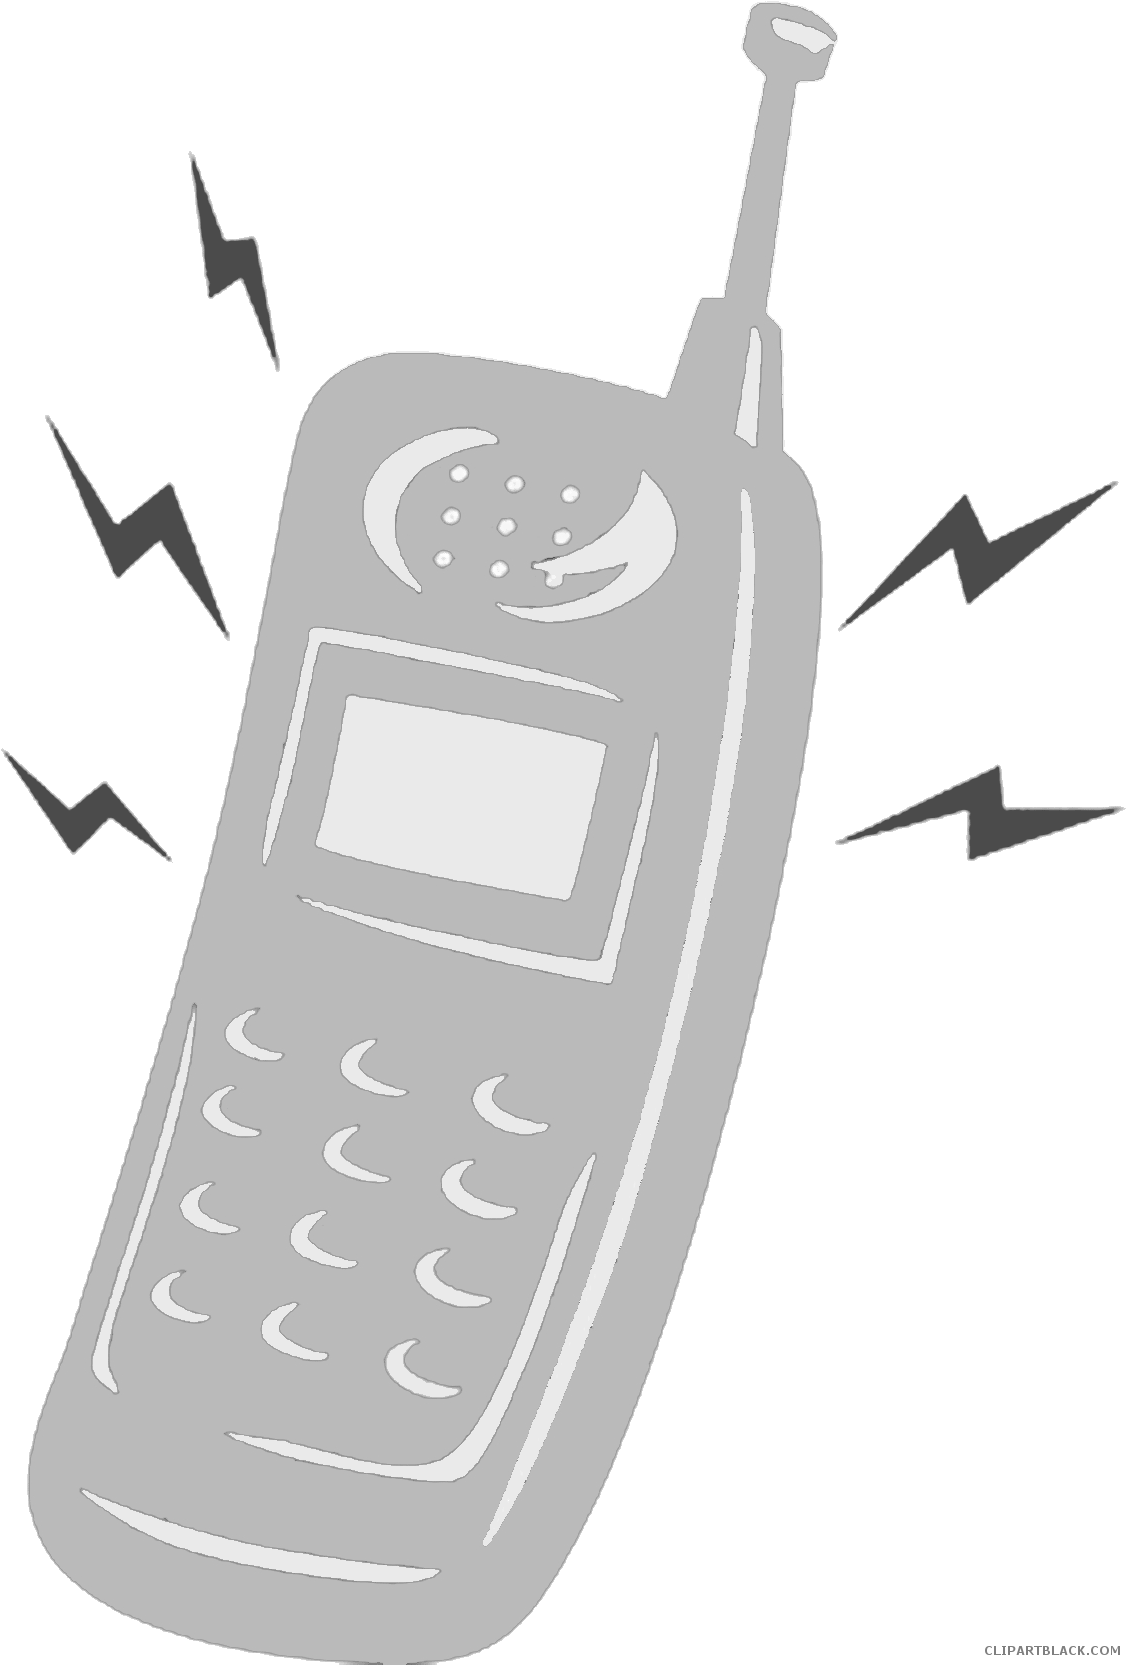 Cell Phone Ringing Tools Free Black White Clipart Images - Cell Phone Ringing (1133x1667)